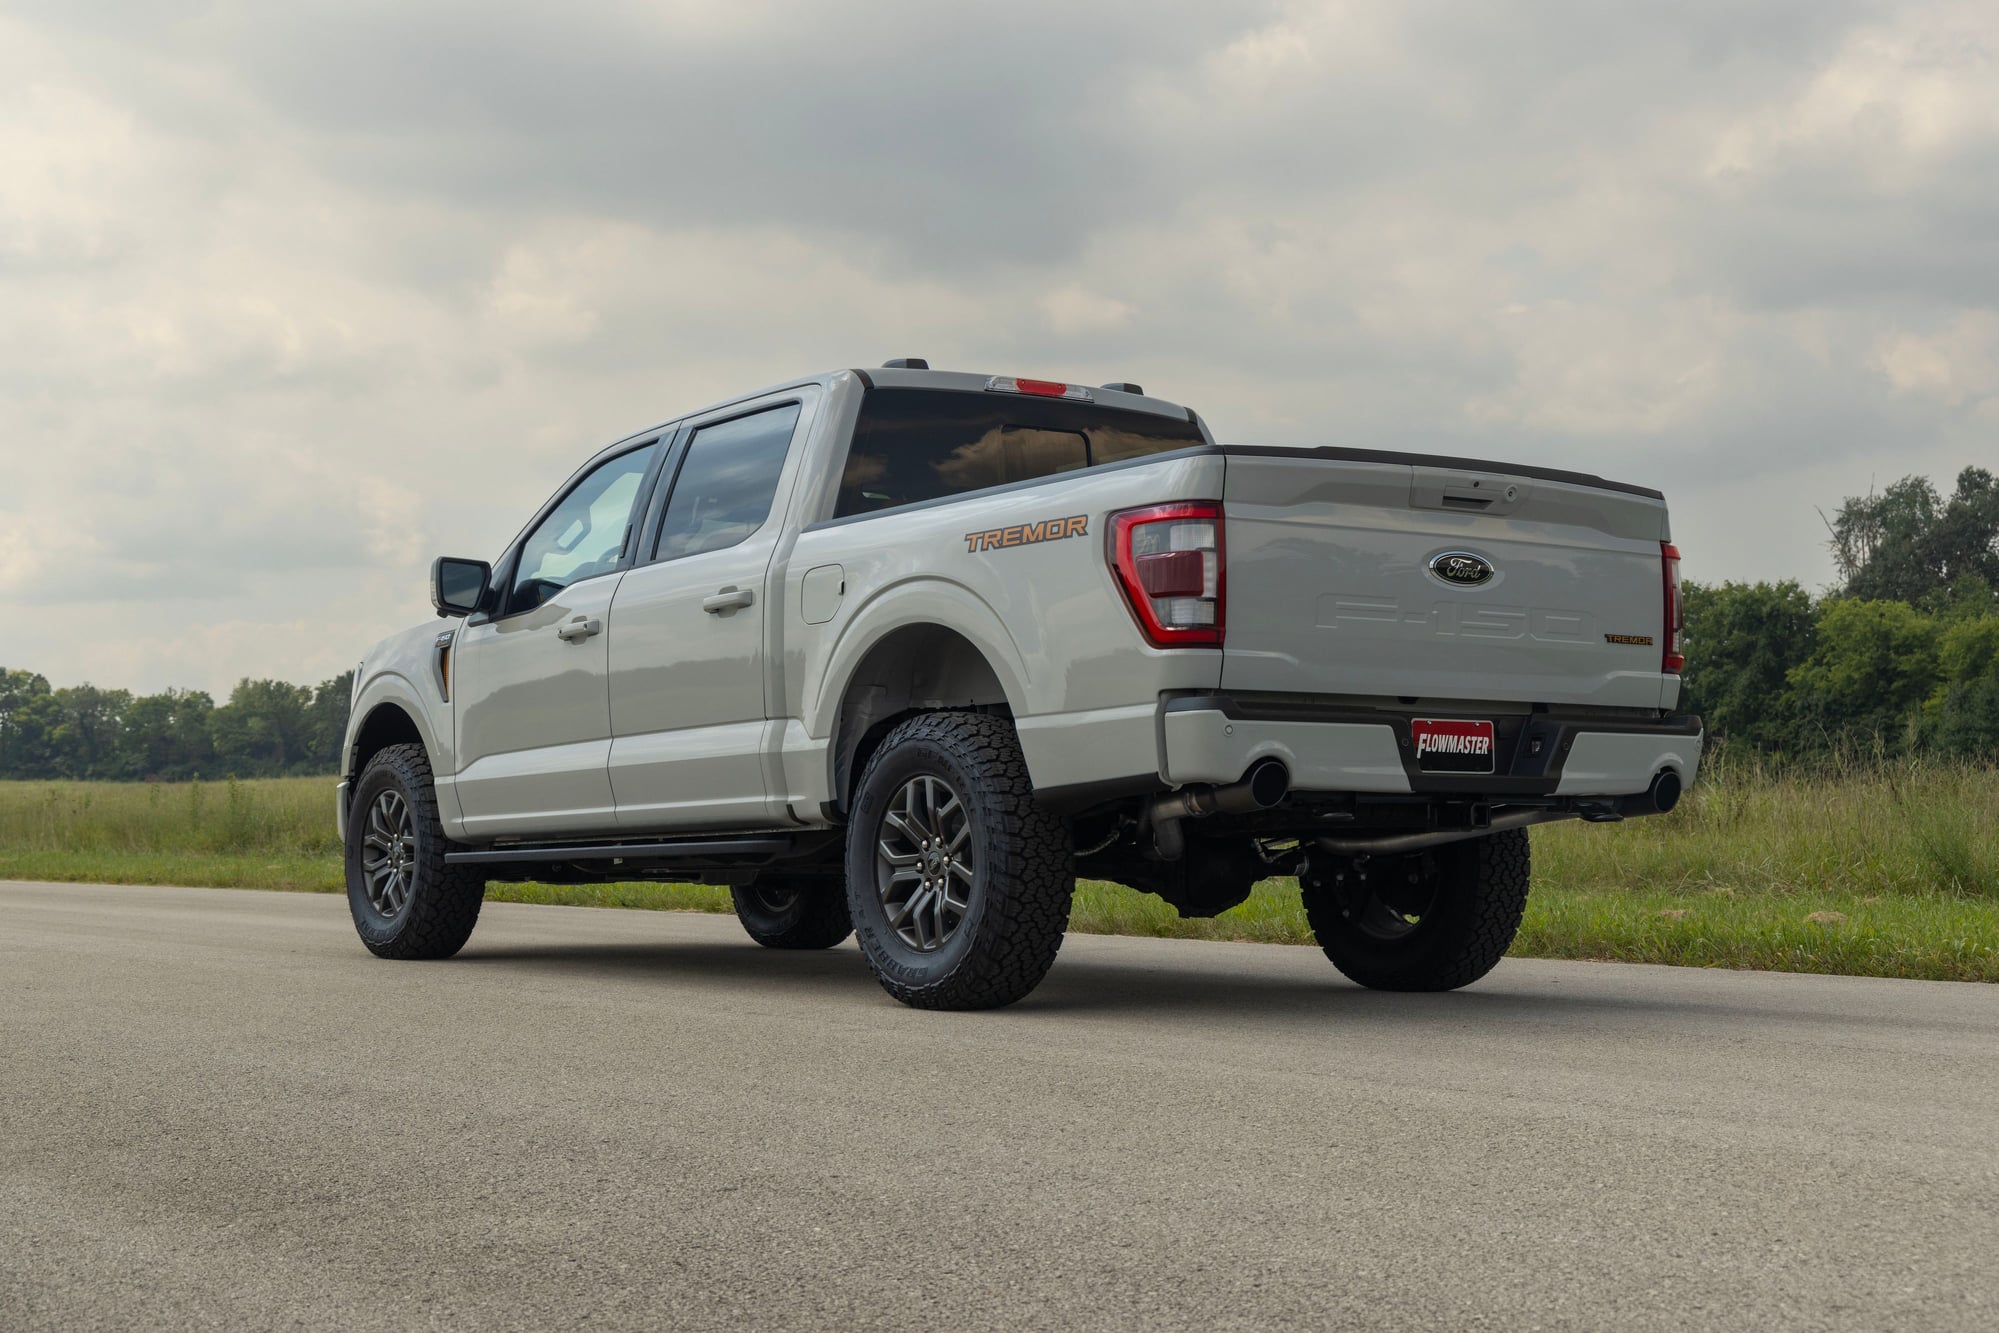 Flowmaster Exhaust Systems - Ford F150 Forum - Community of Ford Truck Fans